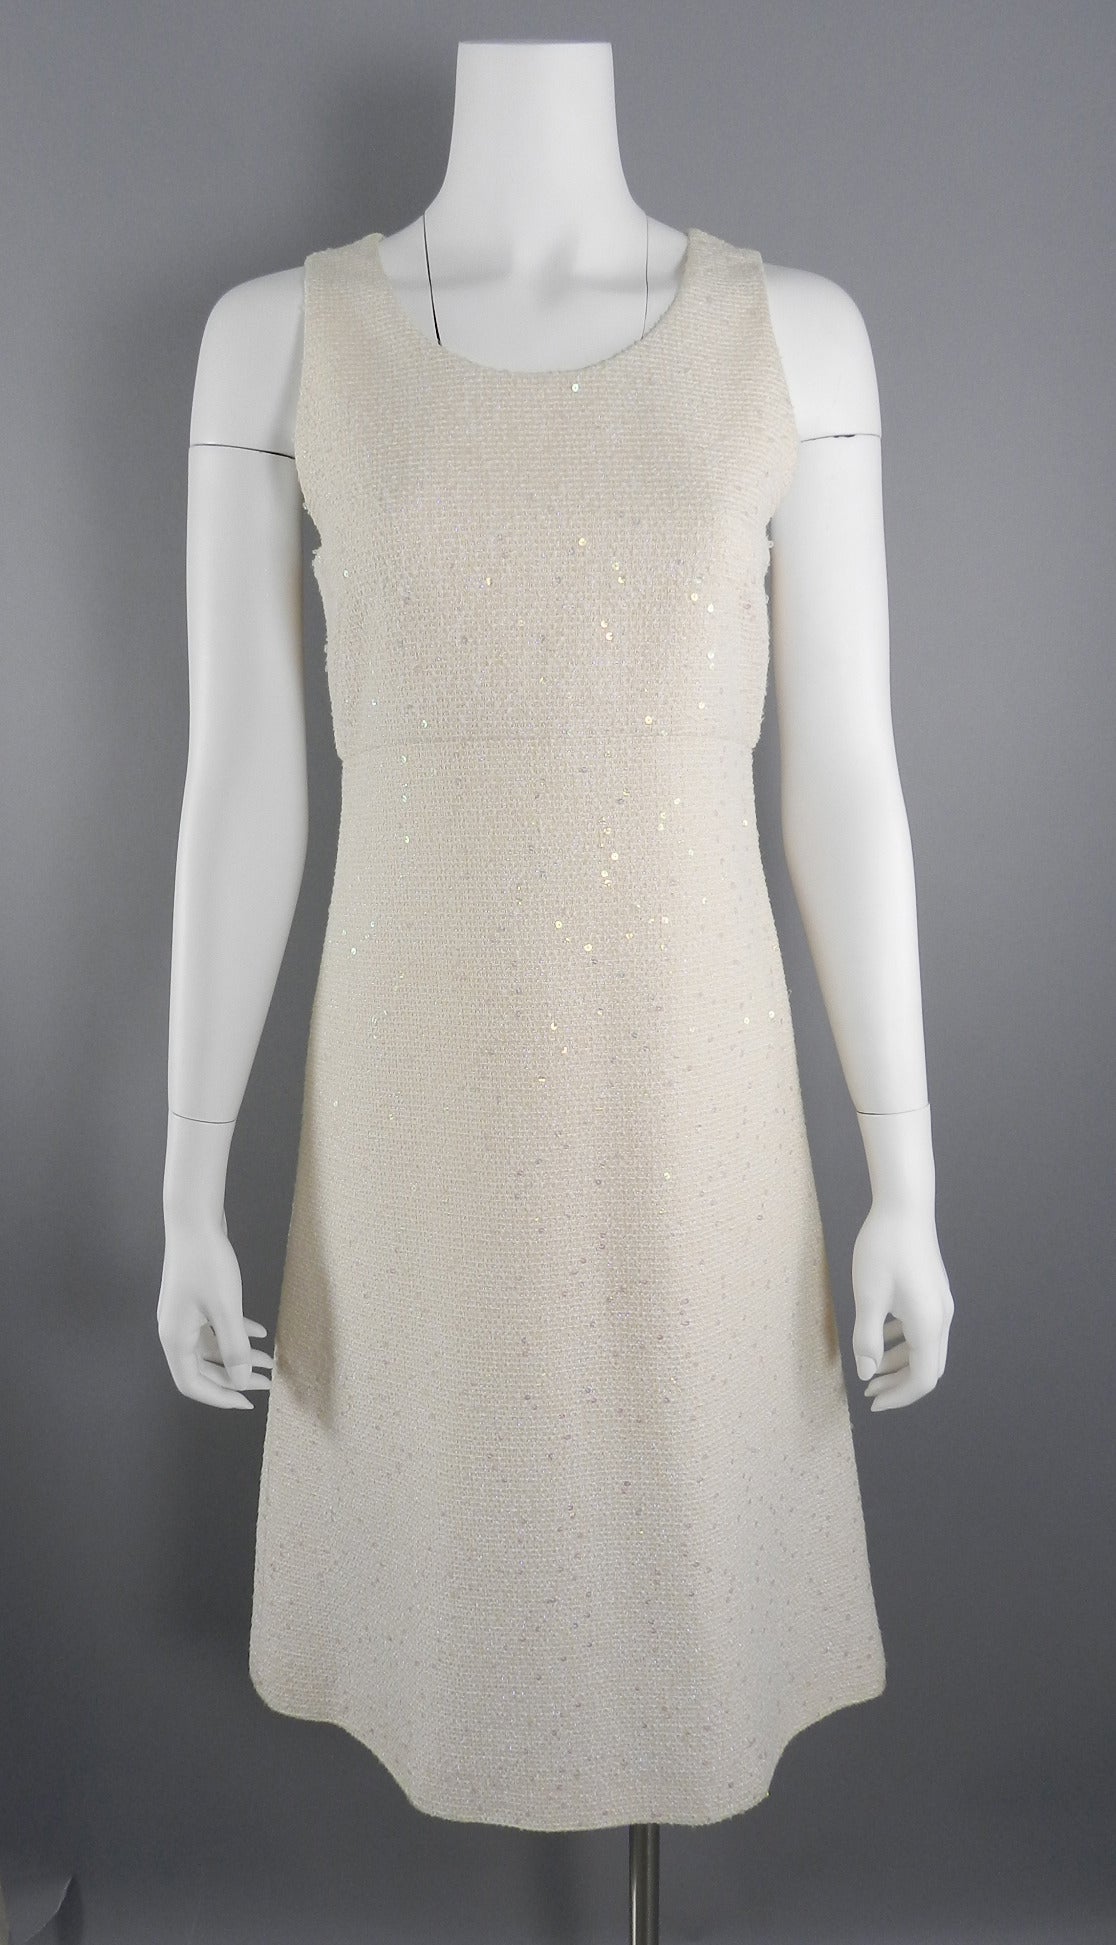 Chanel Ivory Sequin Dress size 38 2